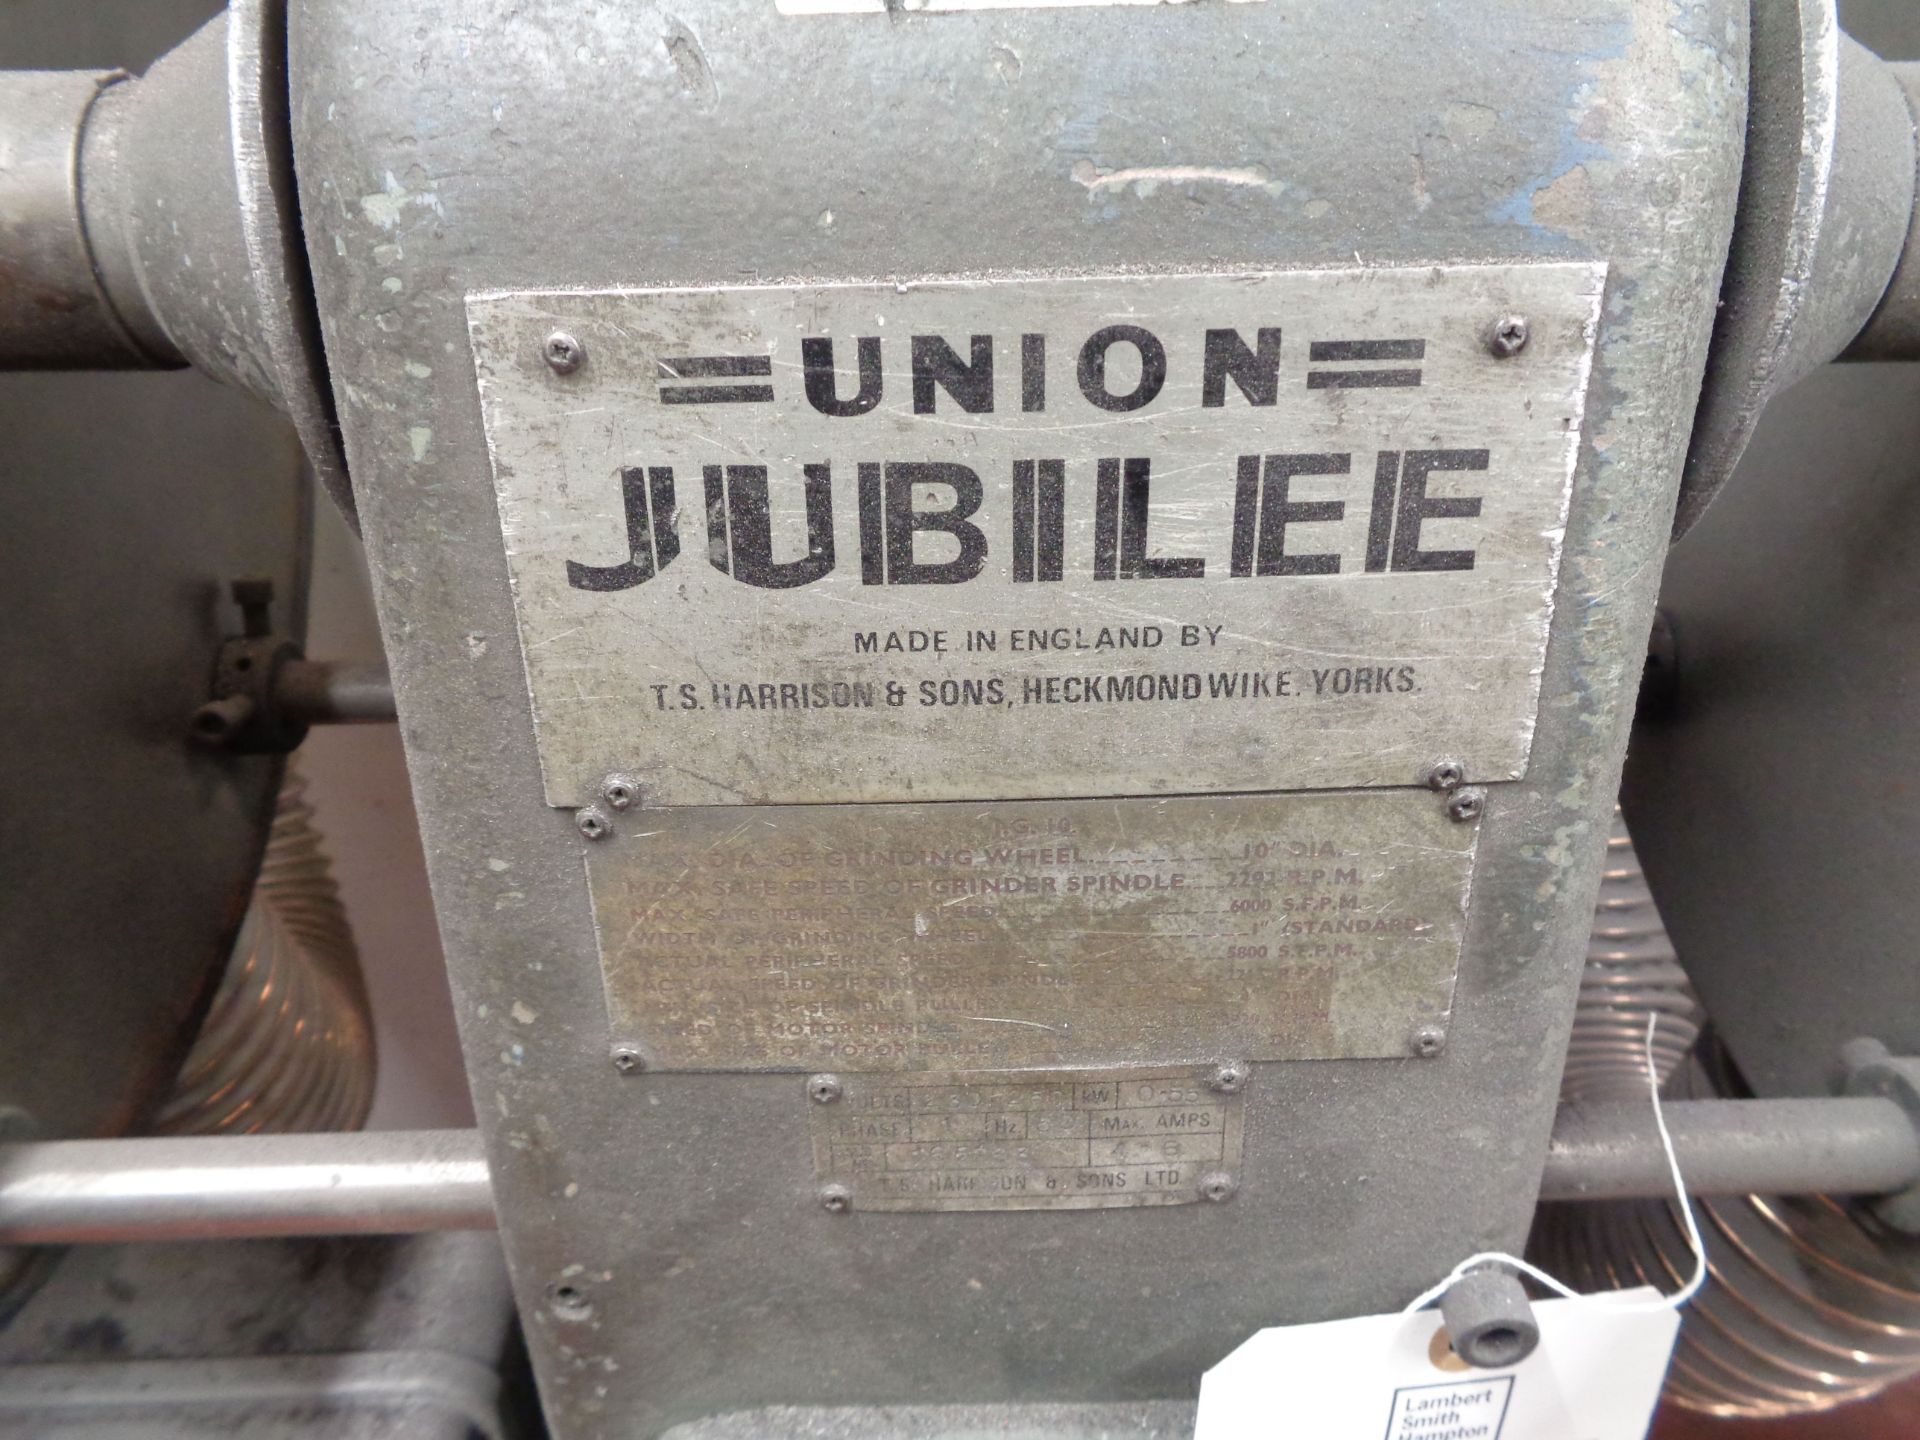 Union Jubilee double ended pedestal grinder serial no. 165983 - Image 3 of 4